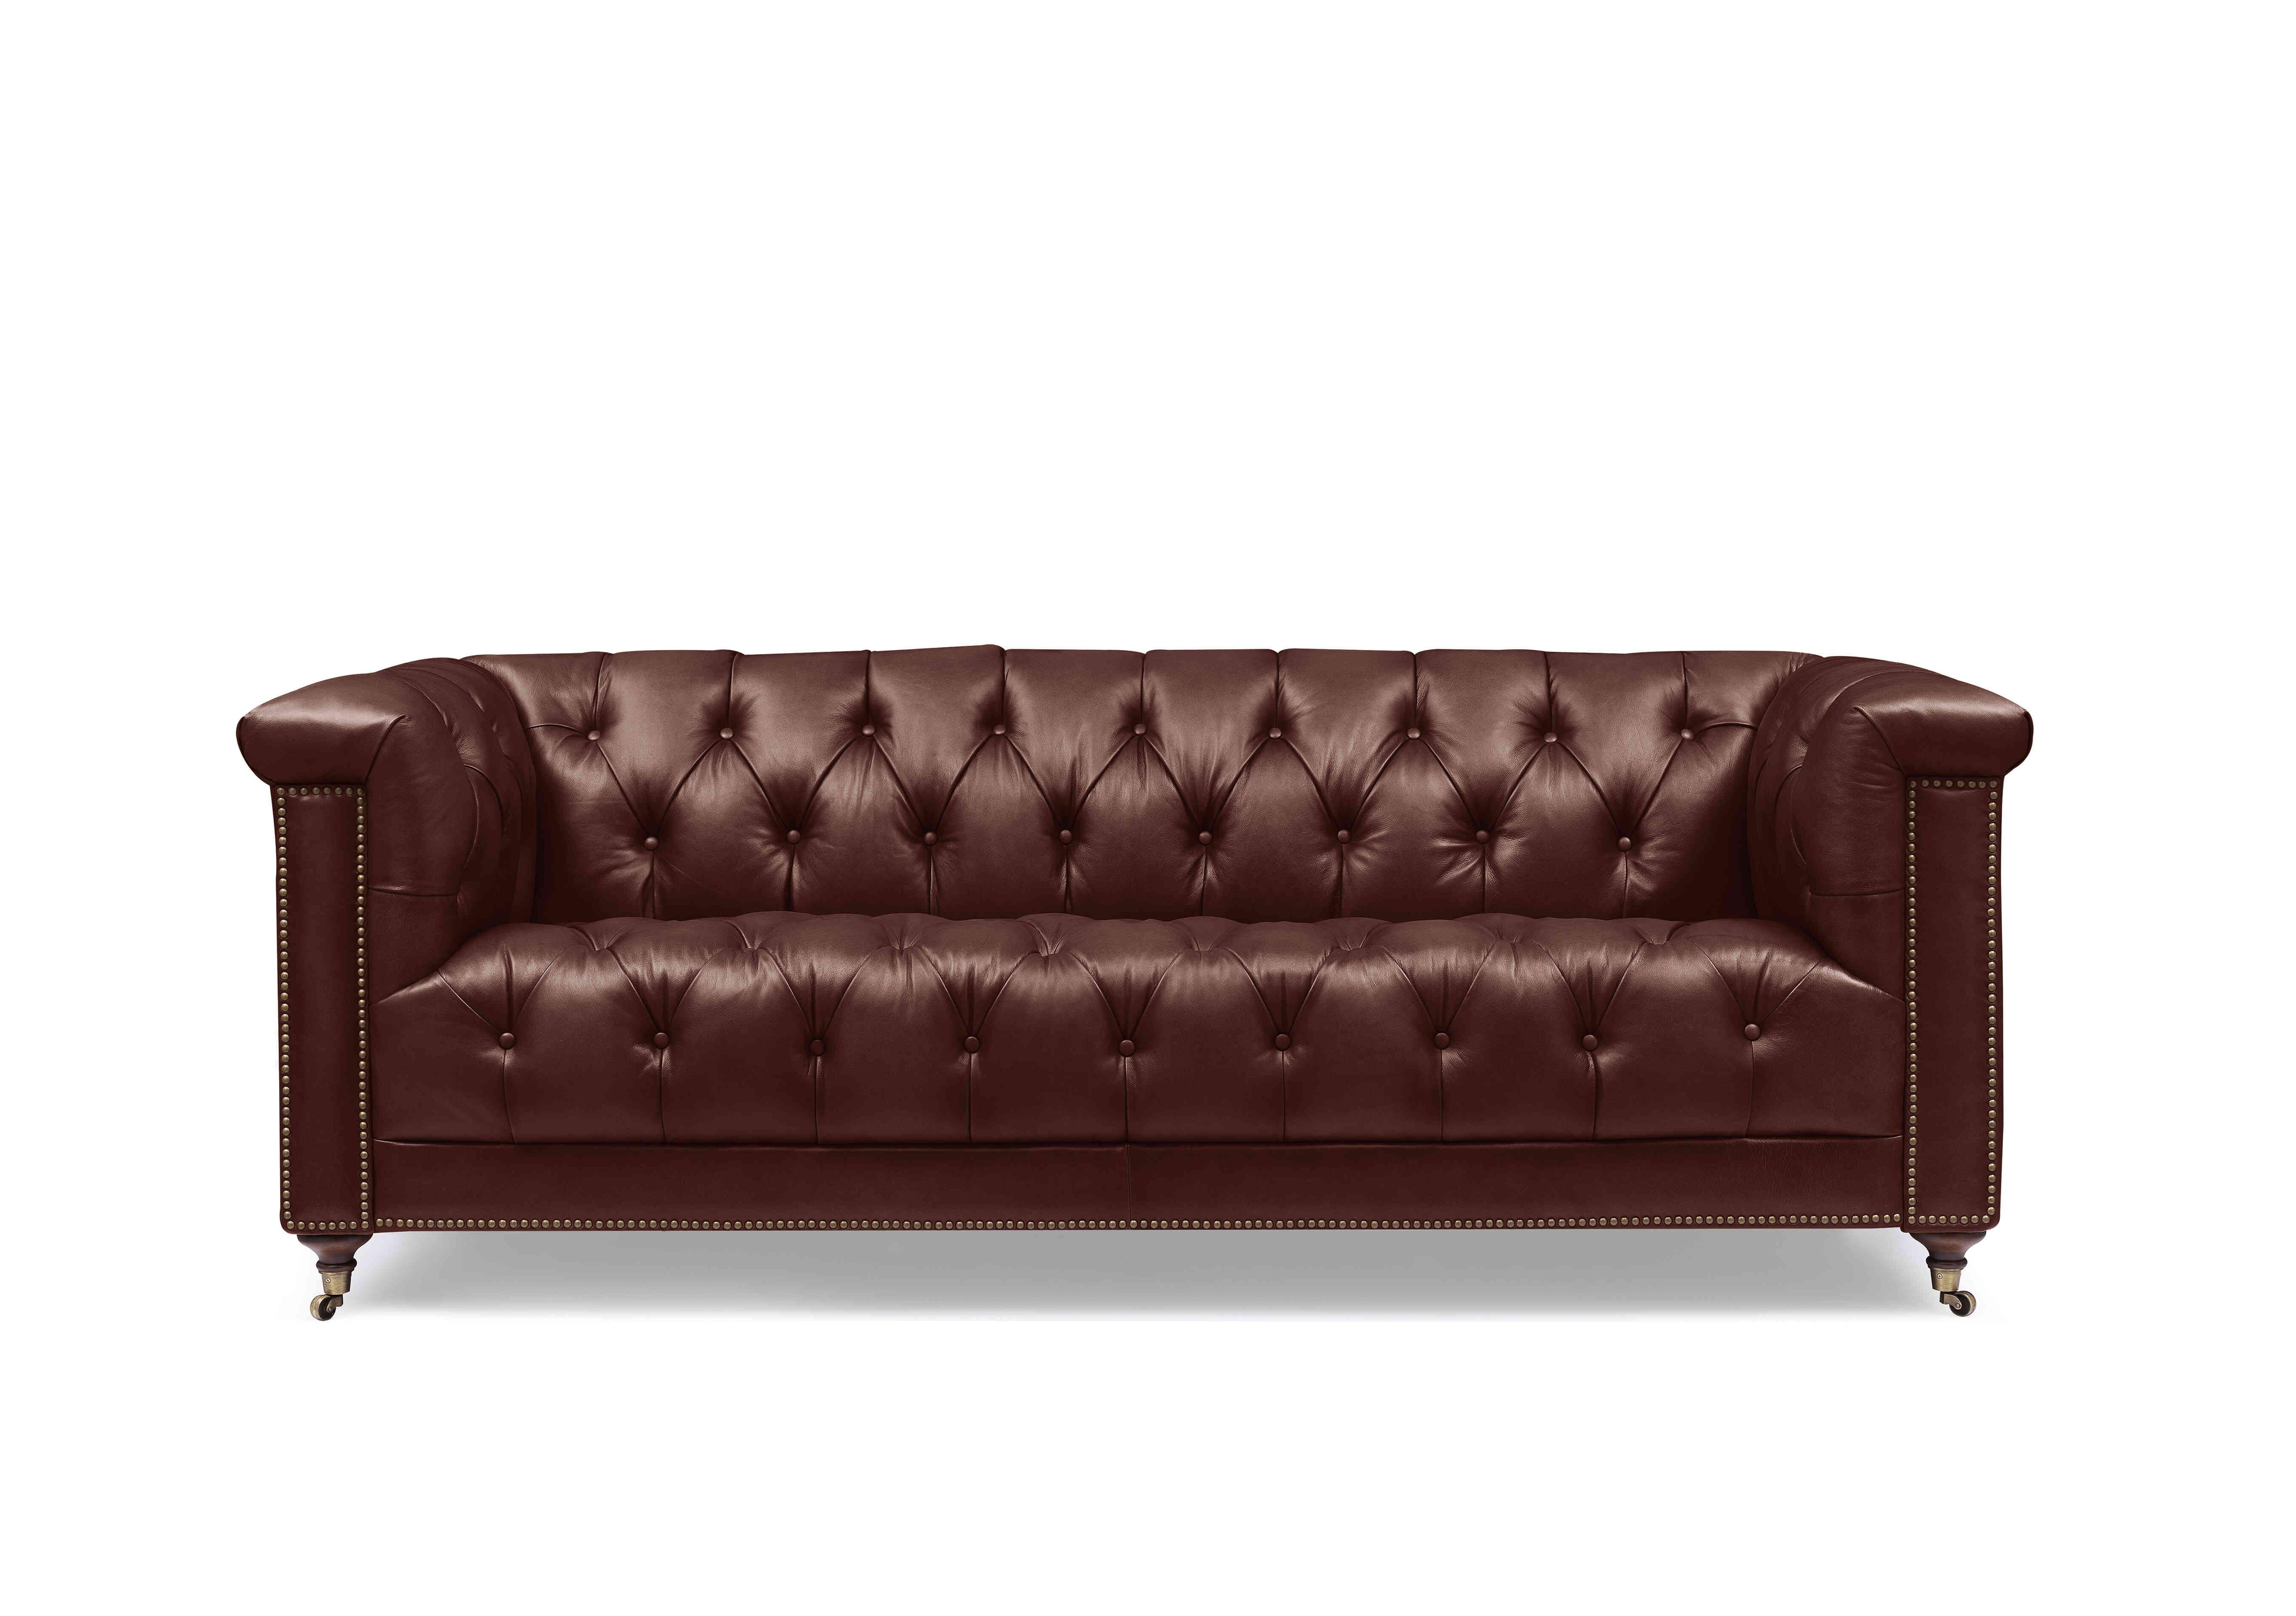 Wallace 3 Seater Leather Chesterfield Sofa in X3y1-1964ls Merlot on Furniture Village